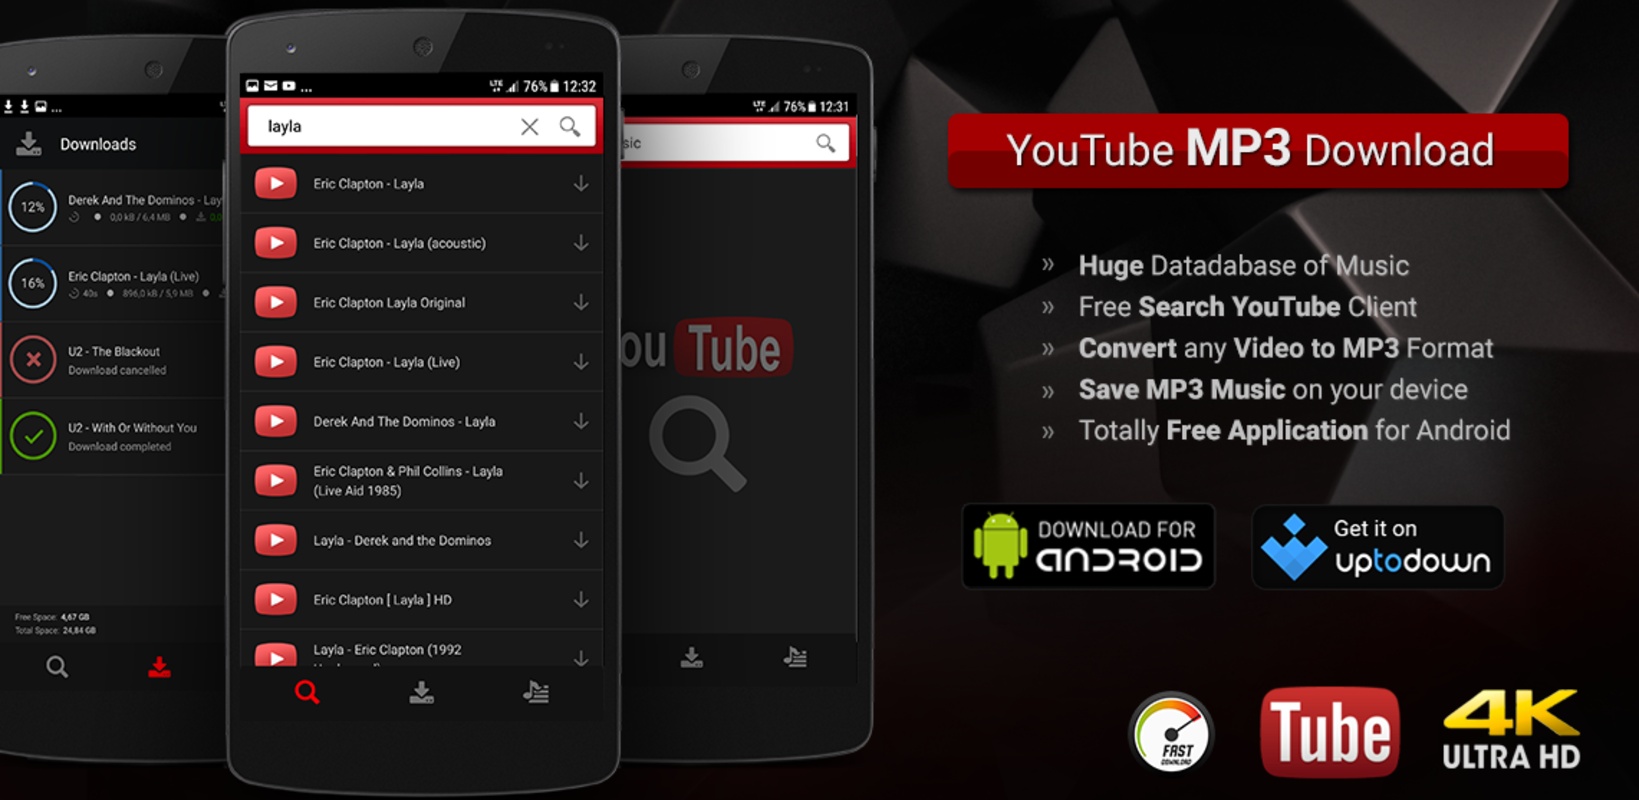 Youtube MP3 Download 2.47 APK feature